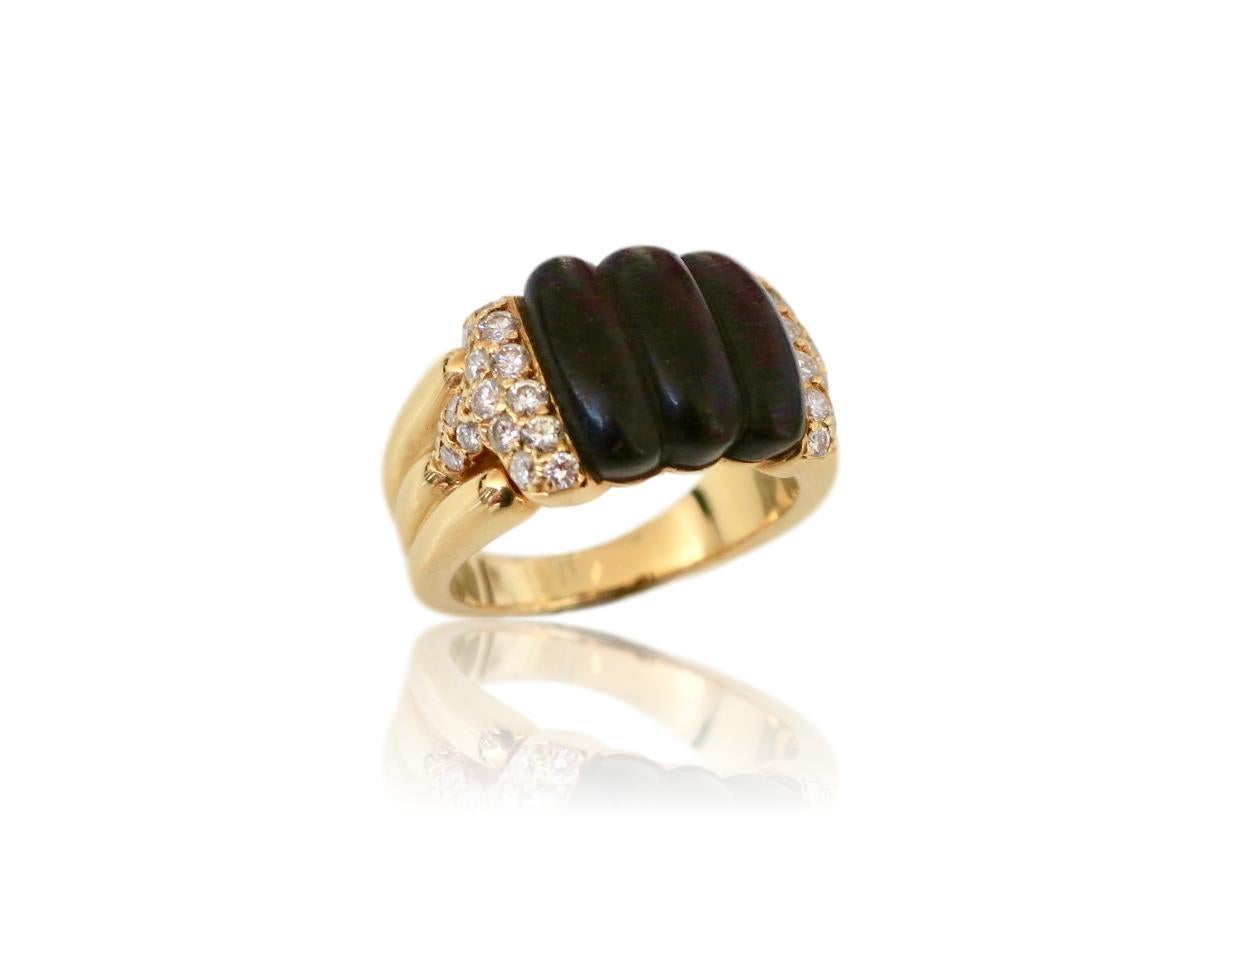 Wood and diamond ring by French designer Boucheron. The 3/8